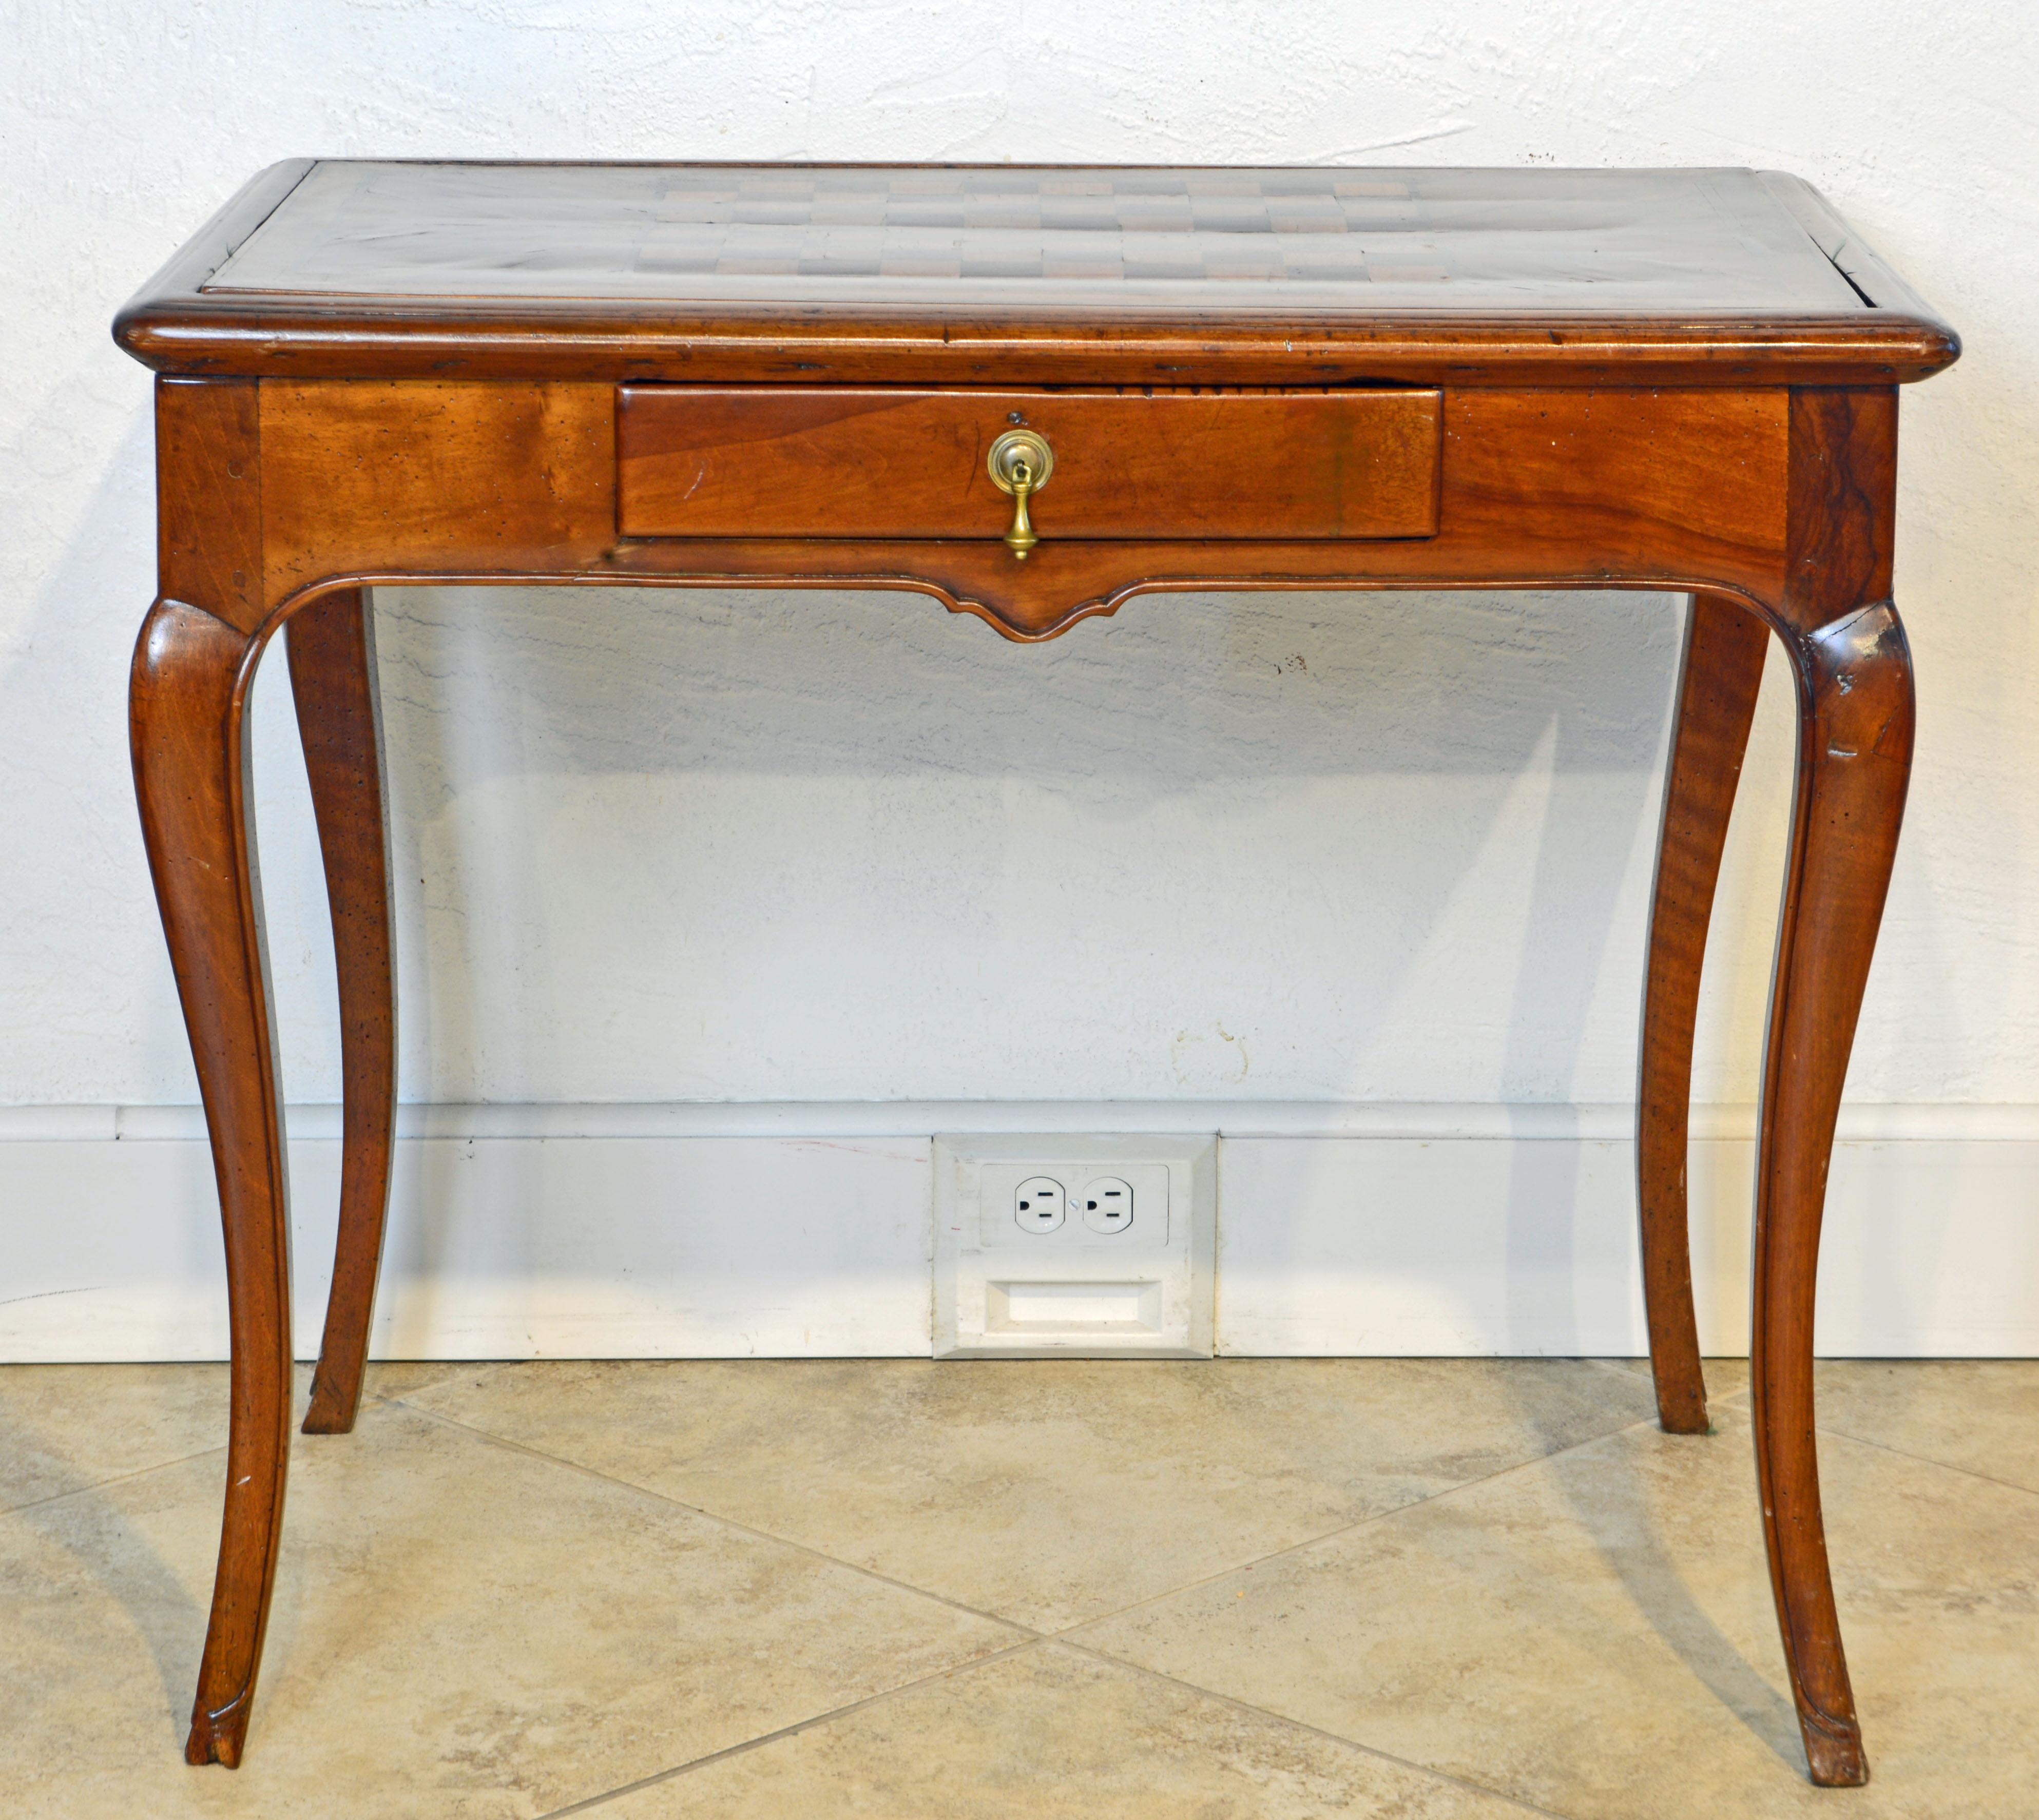 This early 19th century French Provincial fruitwood one drawer chess and game table features a kingwood, tulipwood and mahogany parquetry top which can be turned over revealing a surface lined with green fabric for playing cards. The aprons are